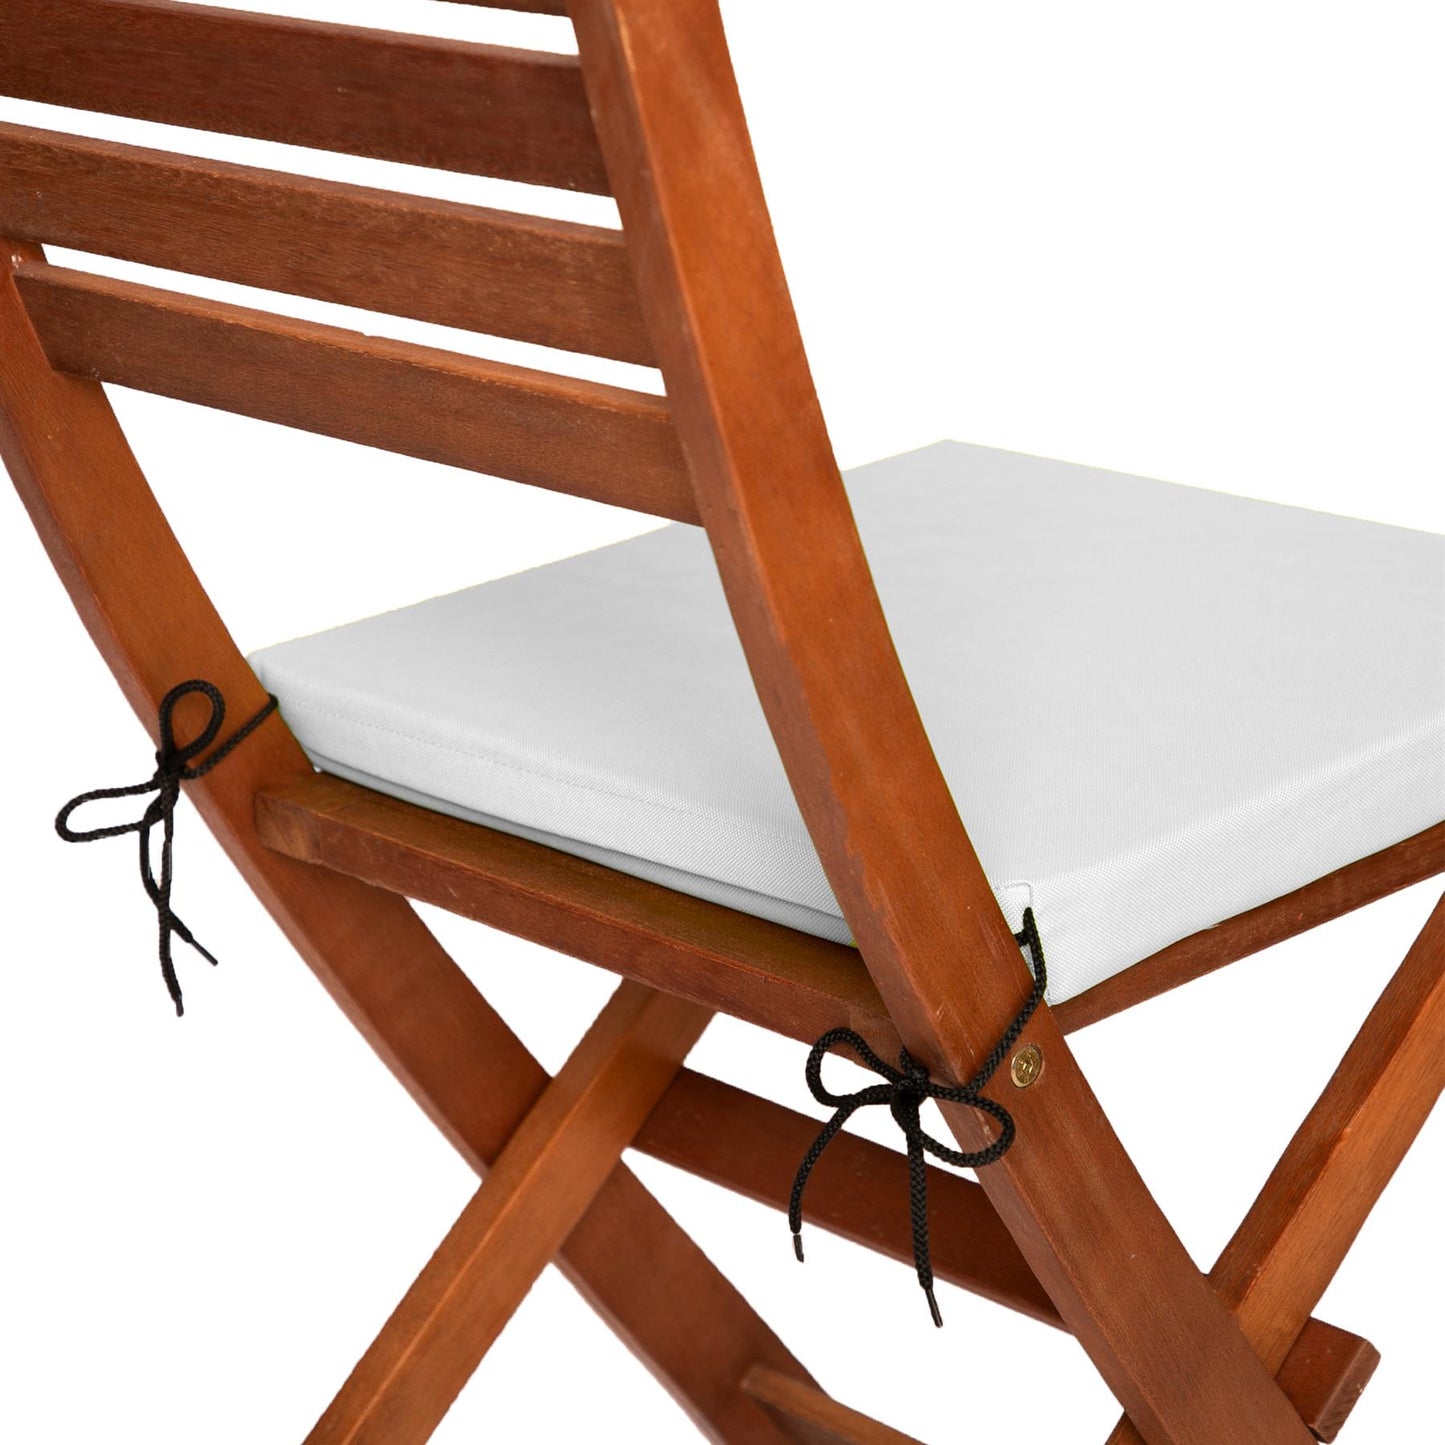 Waterproof Outdoor Chairpad: Durable and Weather Resistant